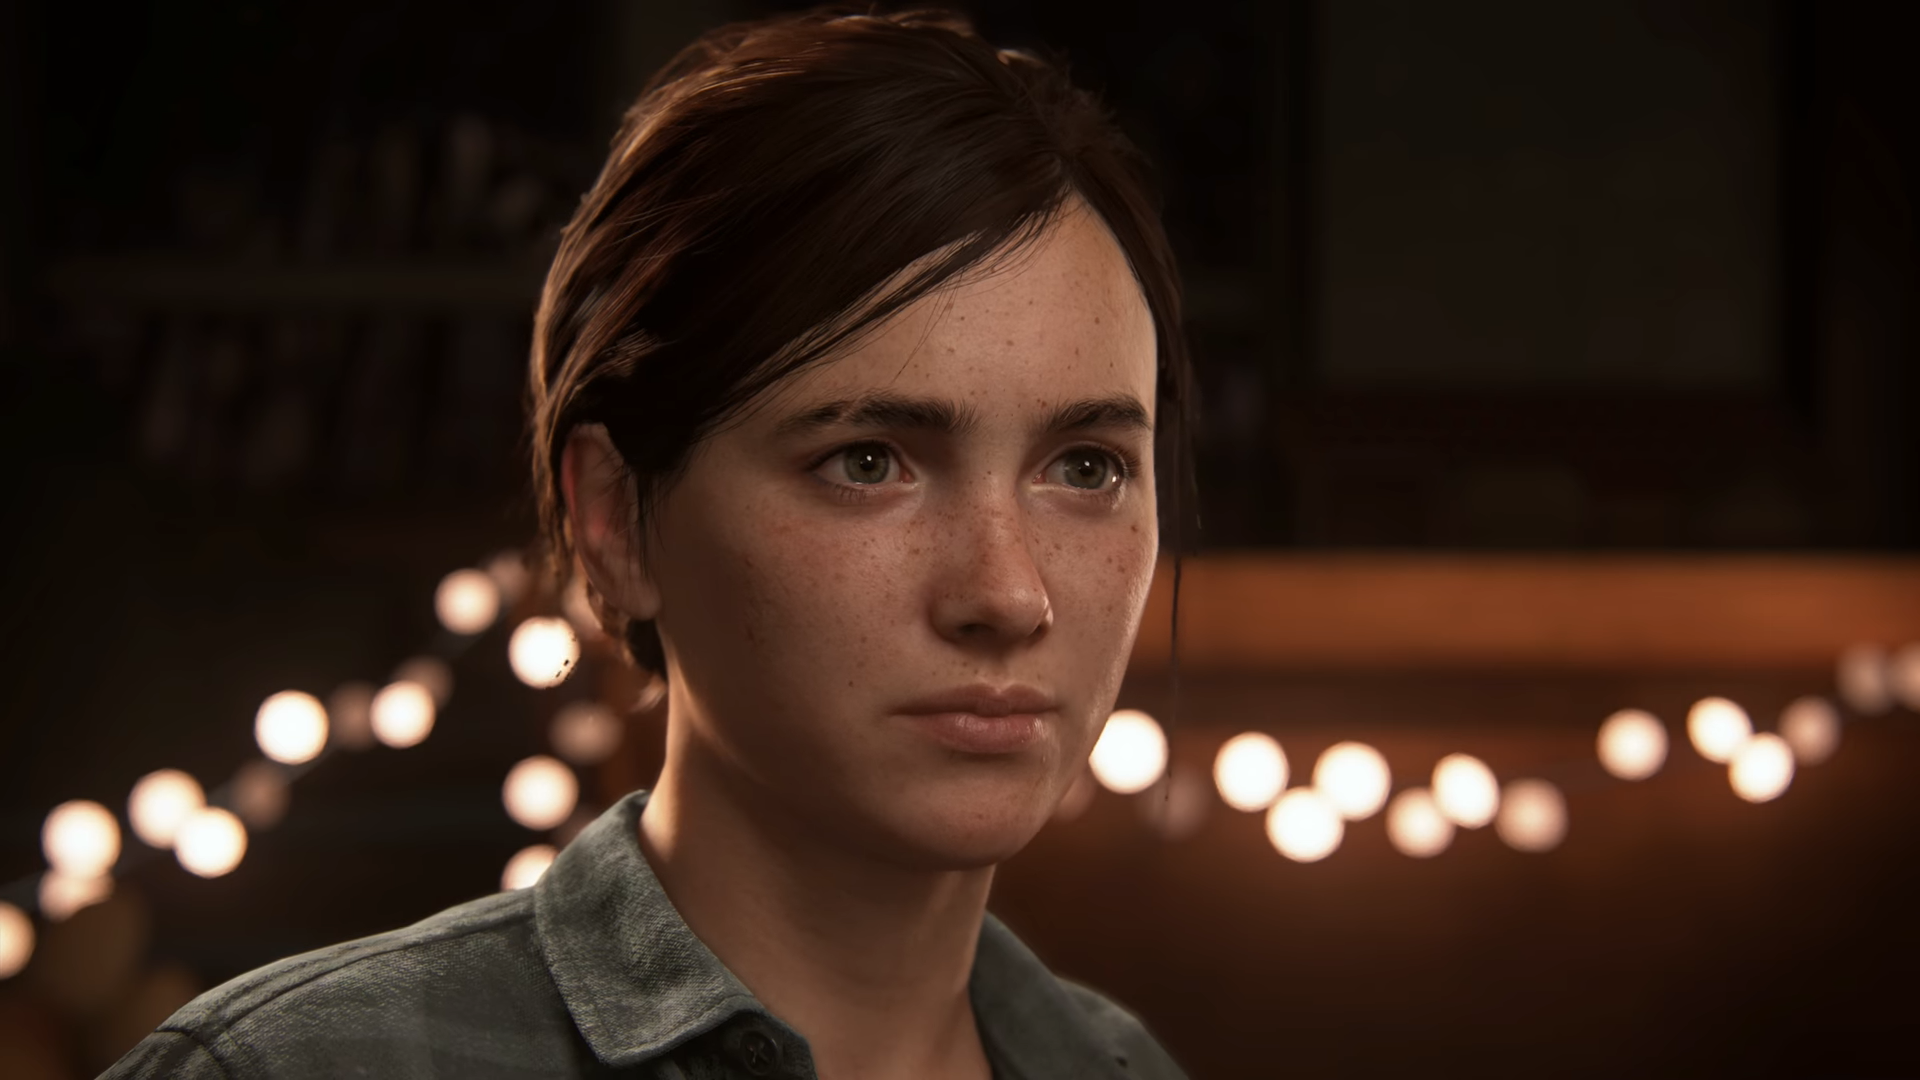 That Song in 'The Last of Us' Just Made Part II That Much More Devastating